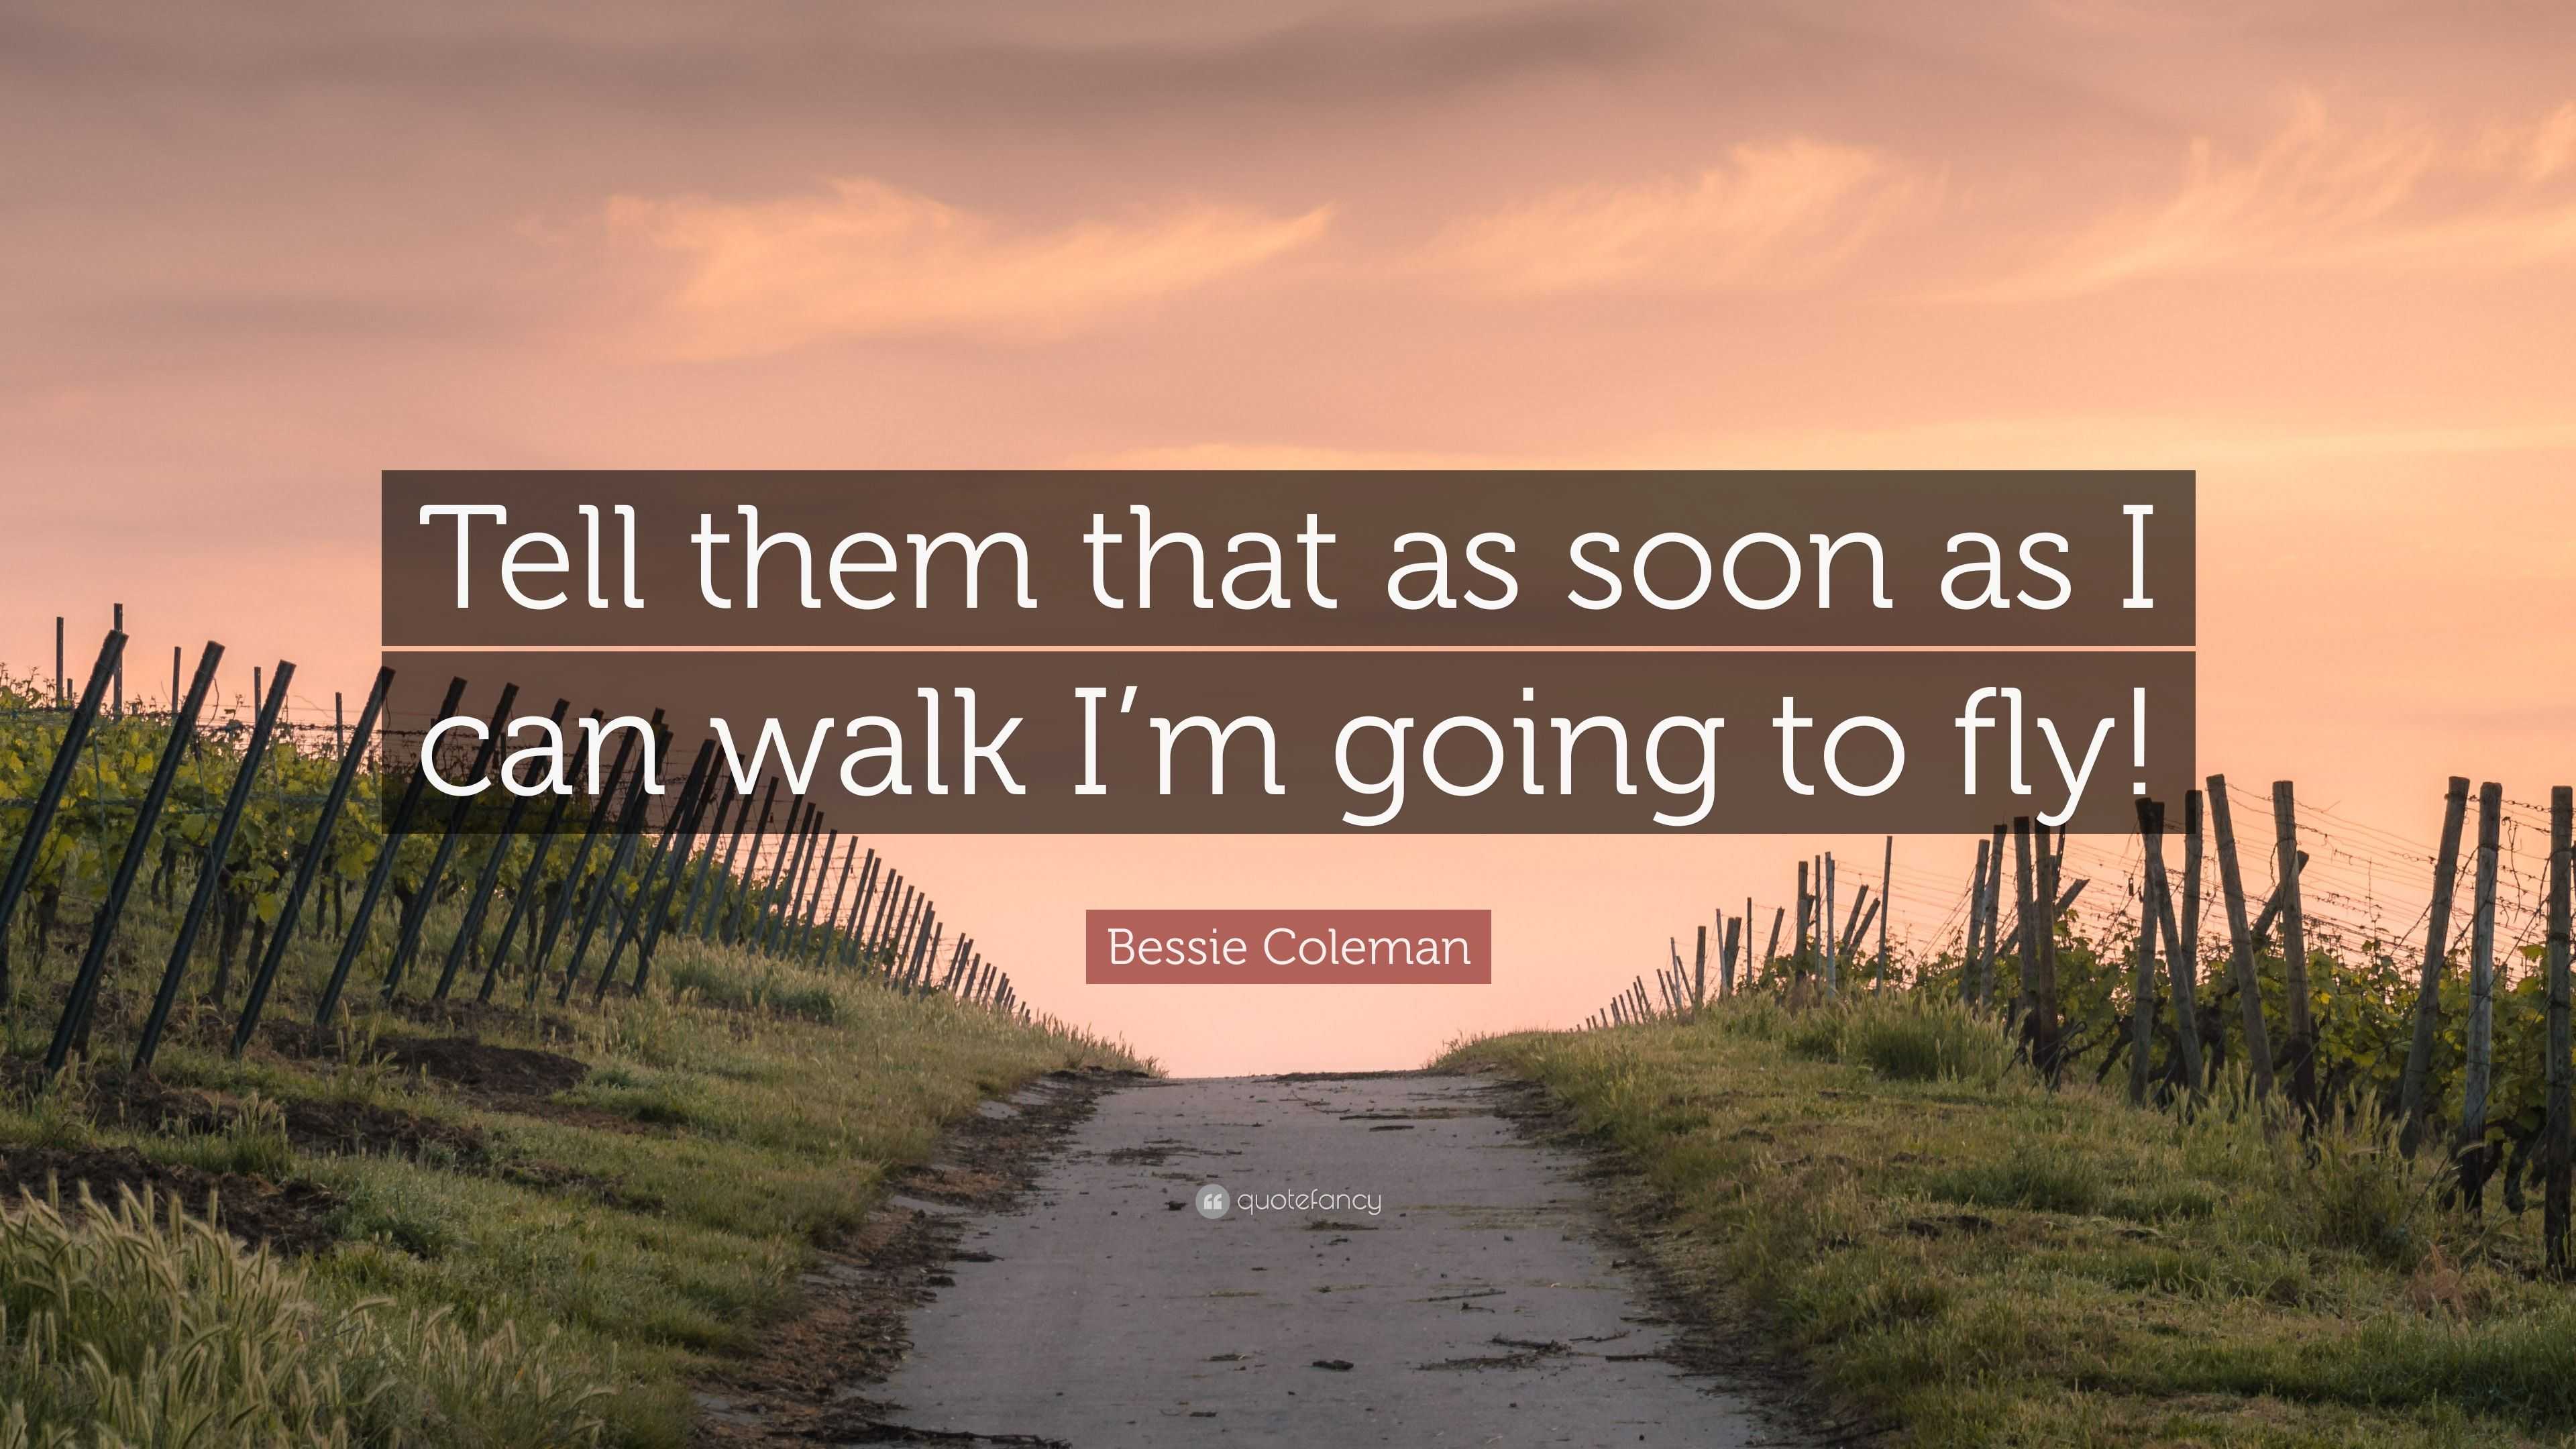 Bessie Coleman Quote: “Tell them that as soon I can walk I'm going to